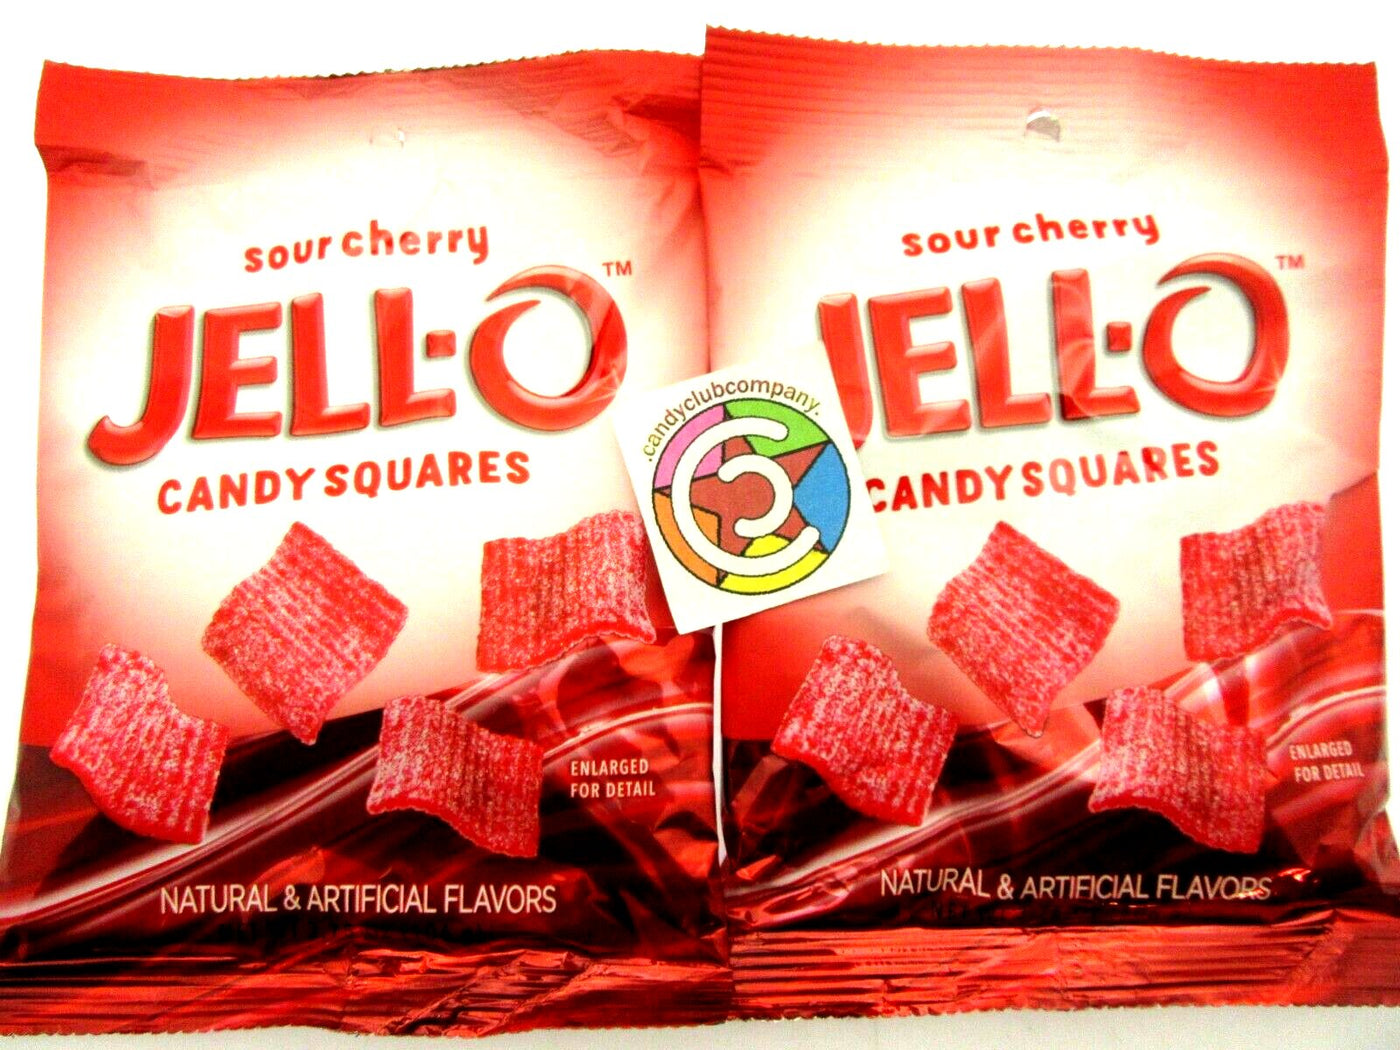 JELL-O Sour Cherry Gummy Squares Candy 3.75oz bags Jello Lot of 2